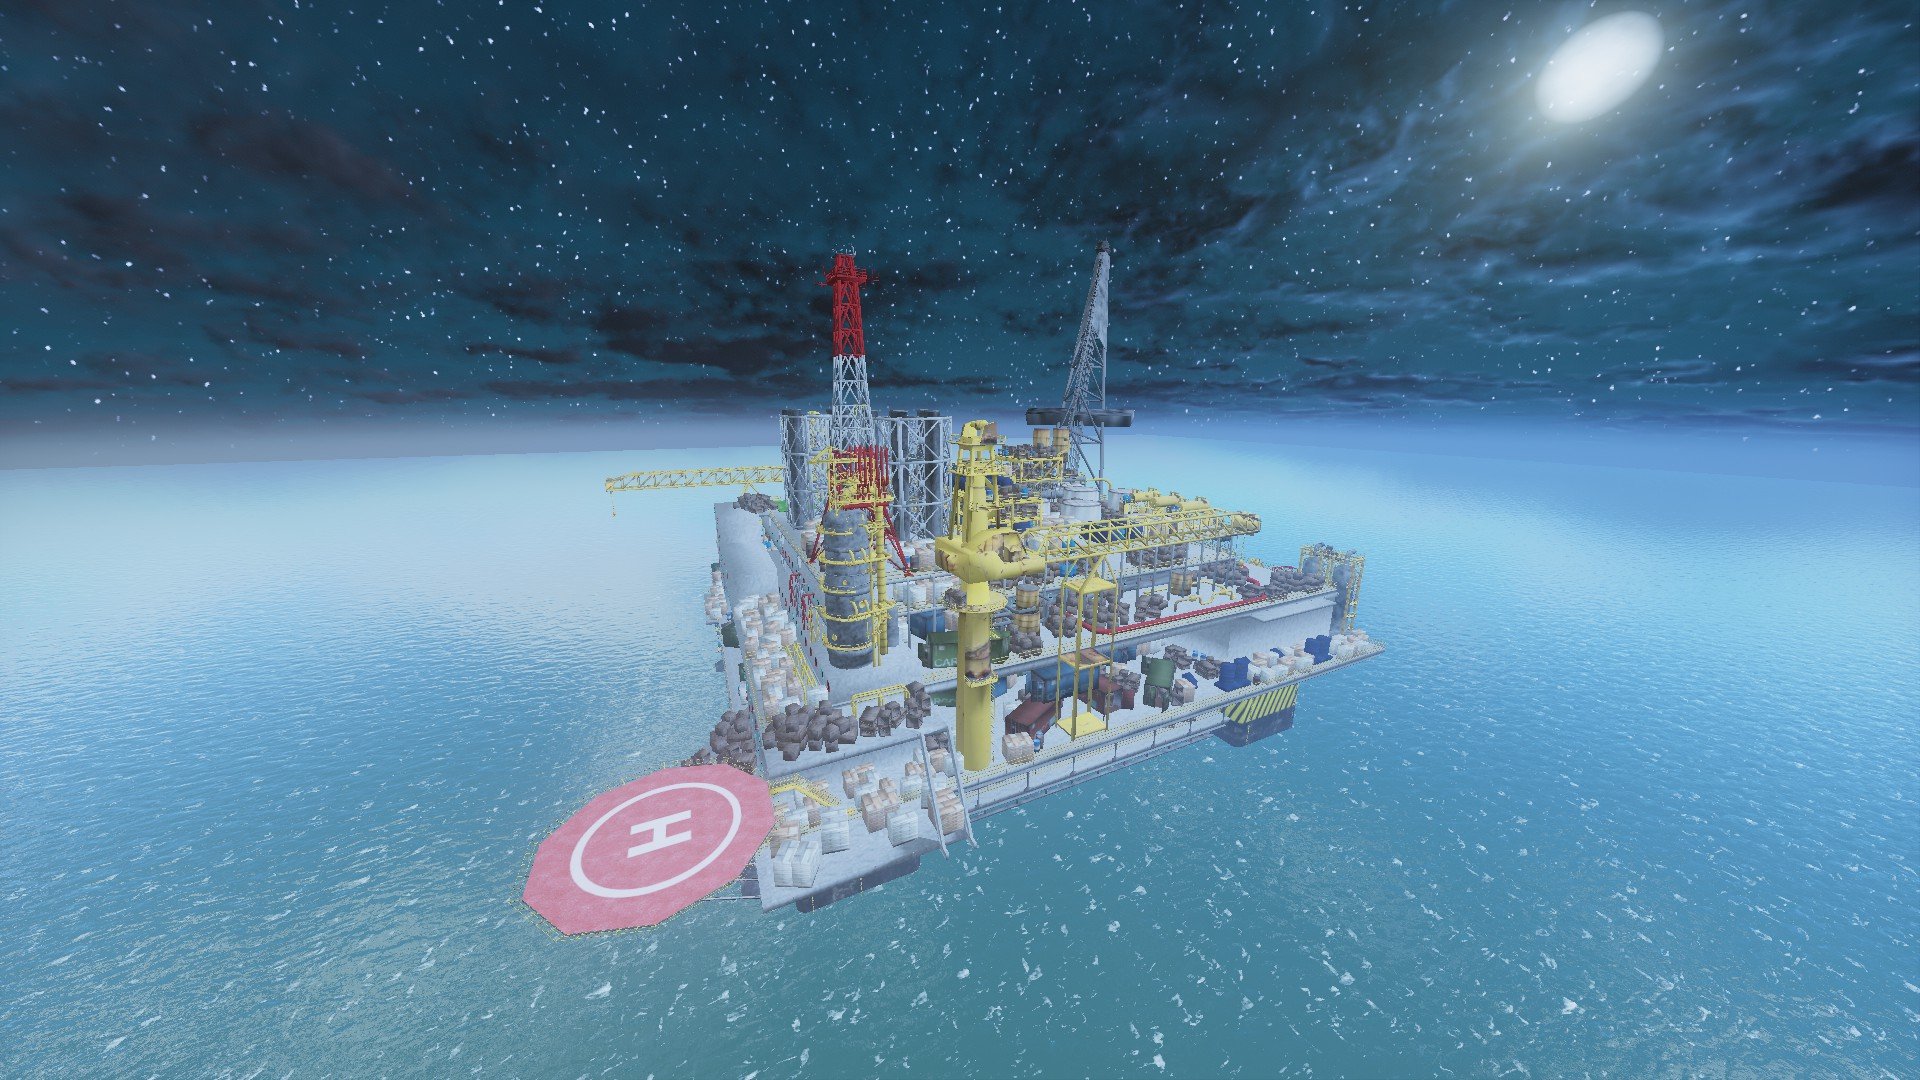 Oil Rig Cover Image